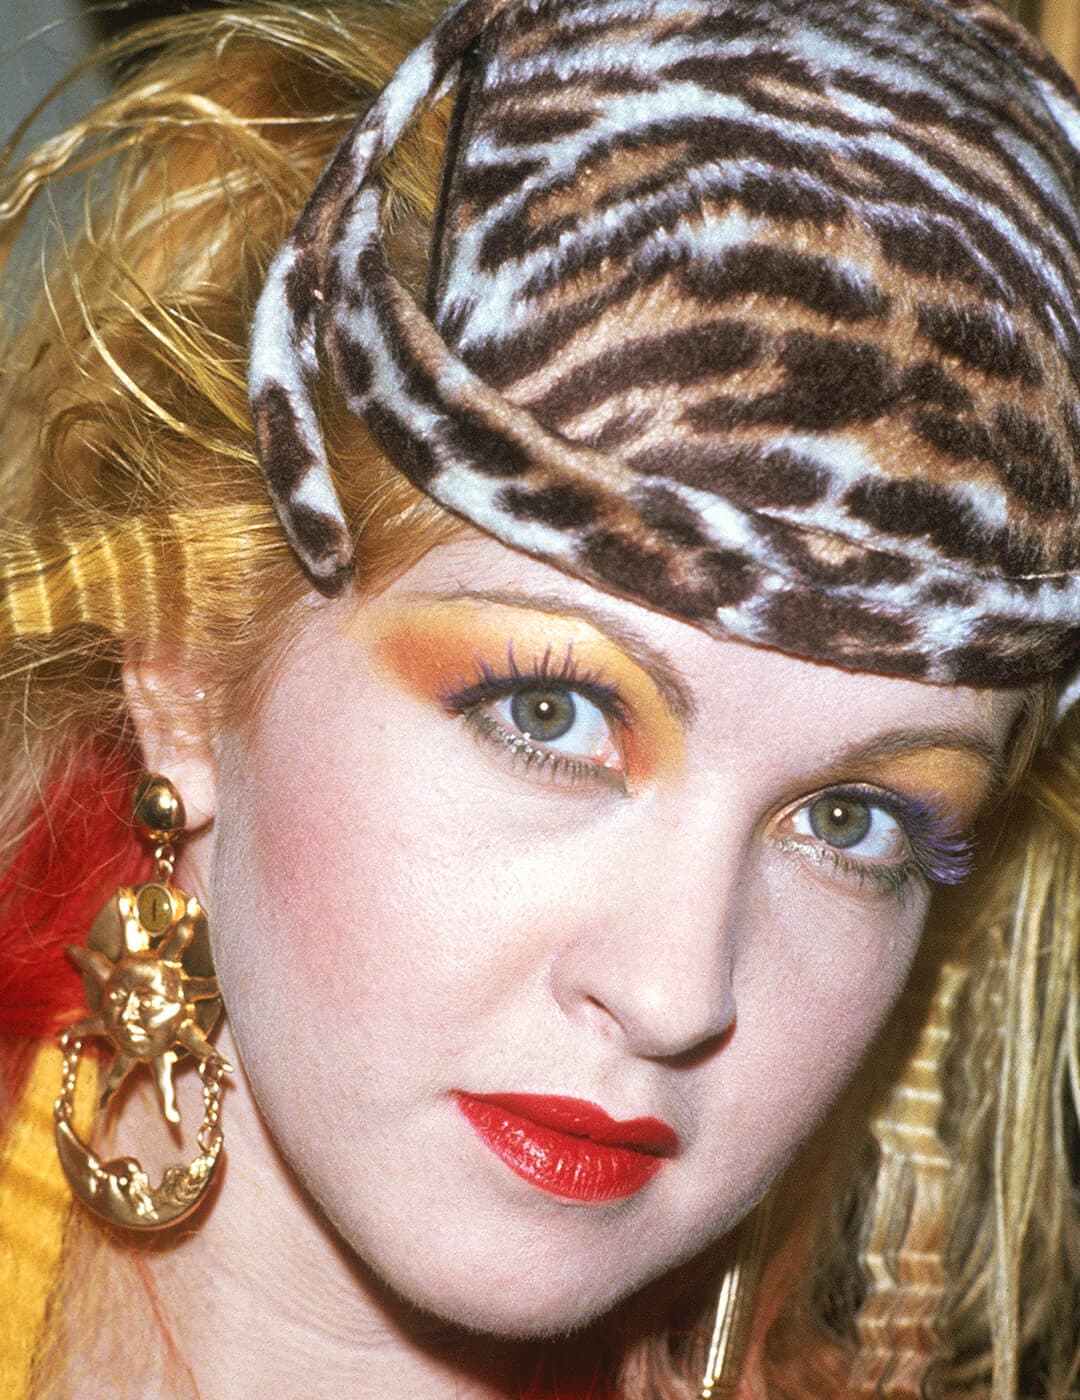 A photo of Cyndi Lauper wearing a leopard print hat and a colorful mascara look